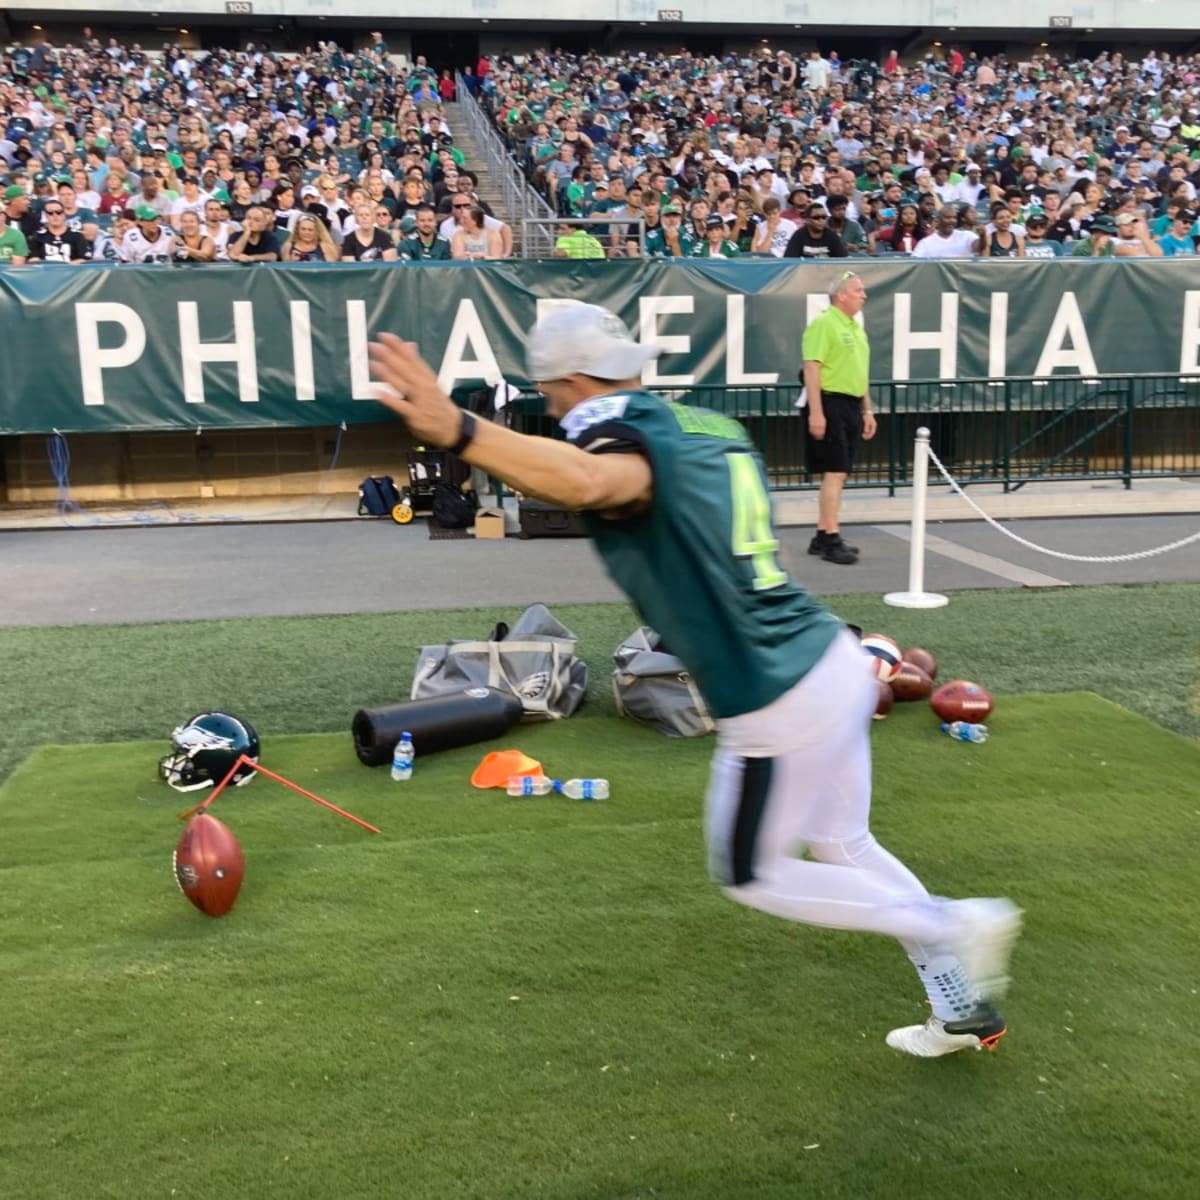 Look out, Phillies! Eagles take swings for charity